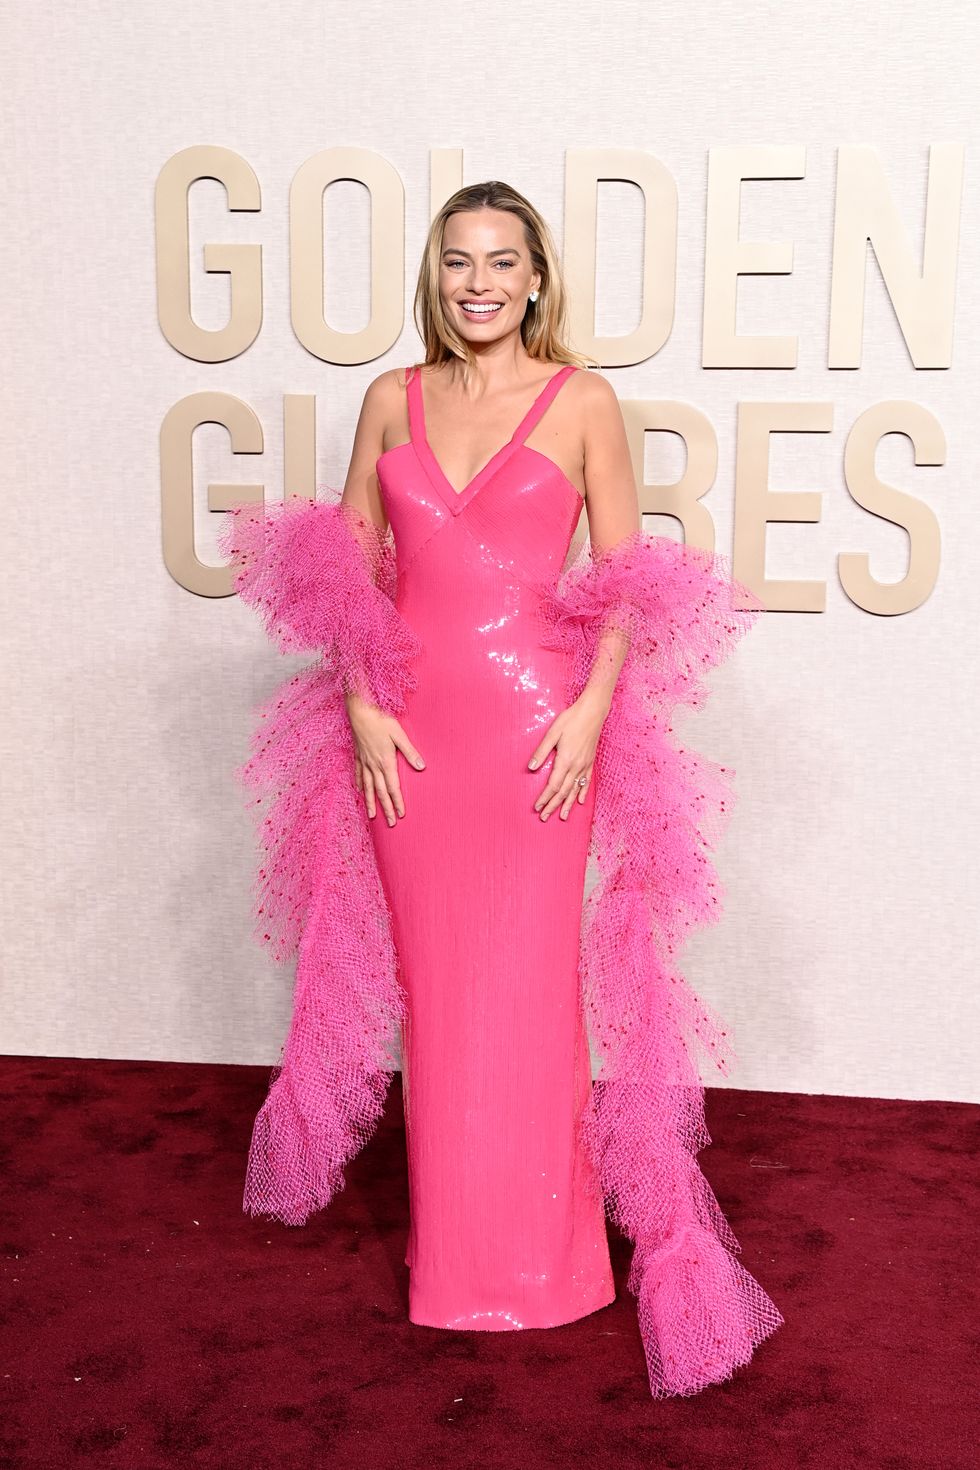 See the Barbie-Inspired Outfits Margot Robbie Has Worn on Red Carpets